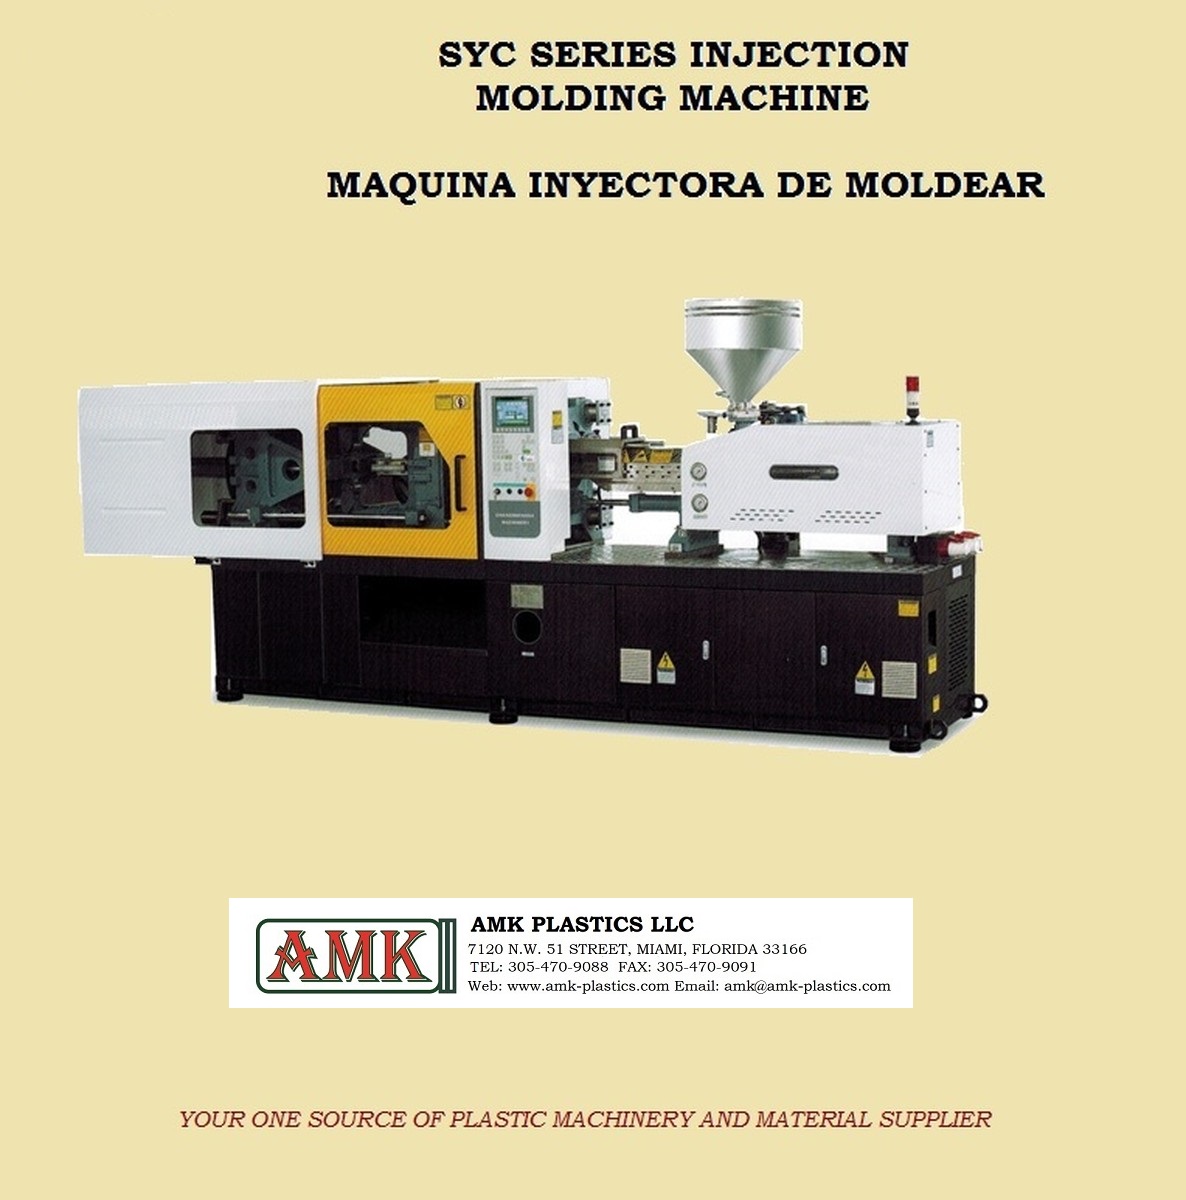 SYC SERIES INJECTION MOLDING MACHINE